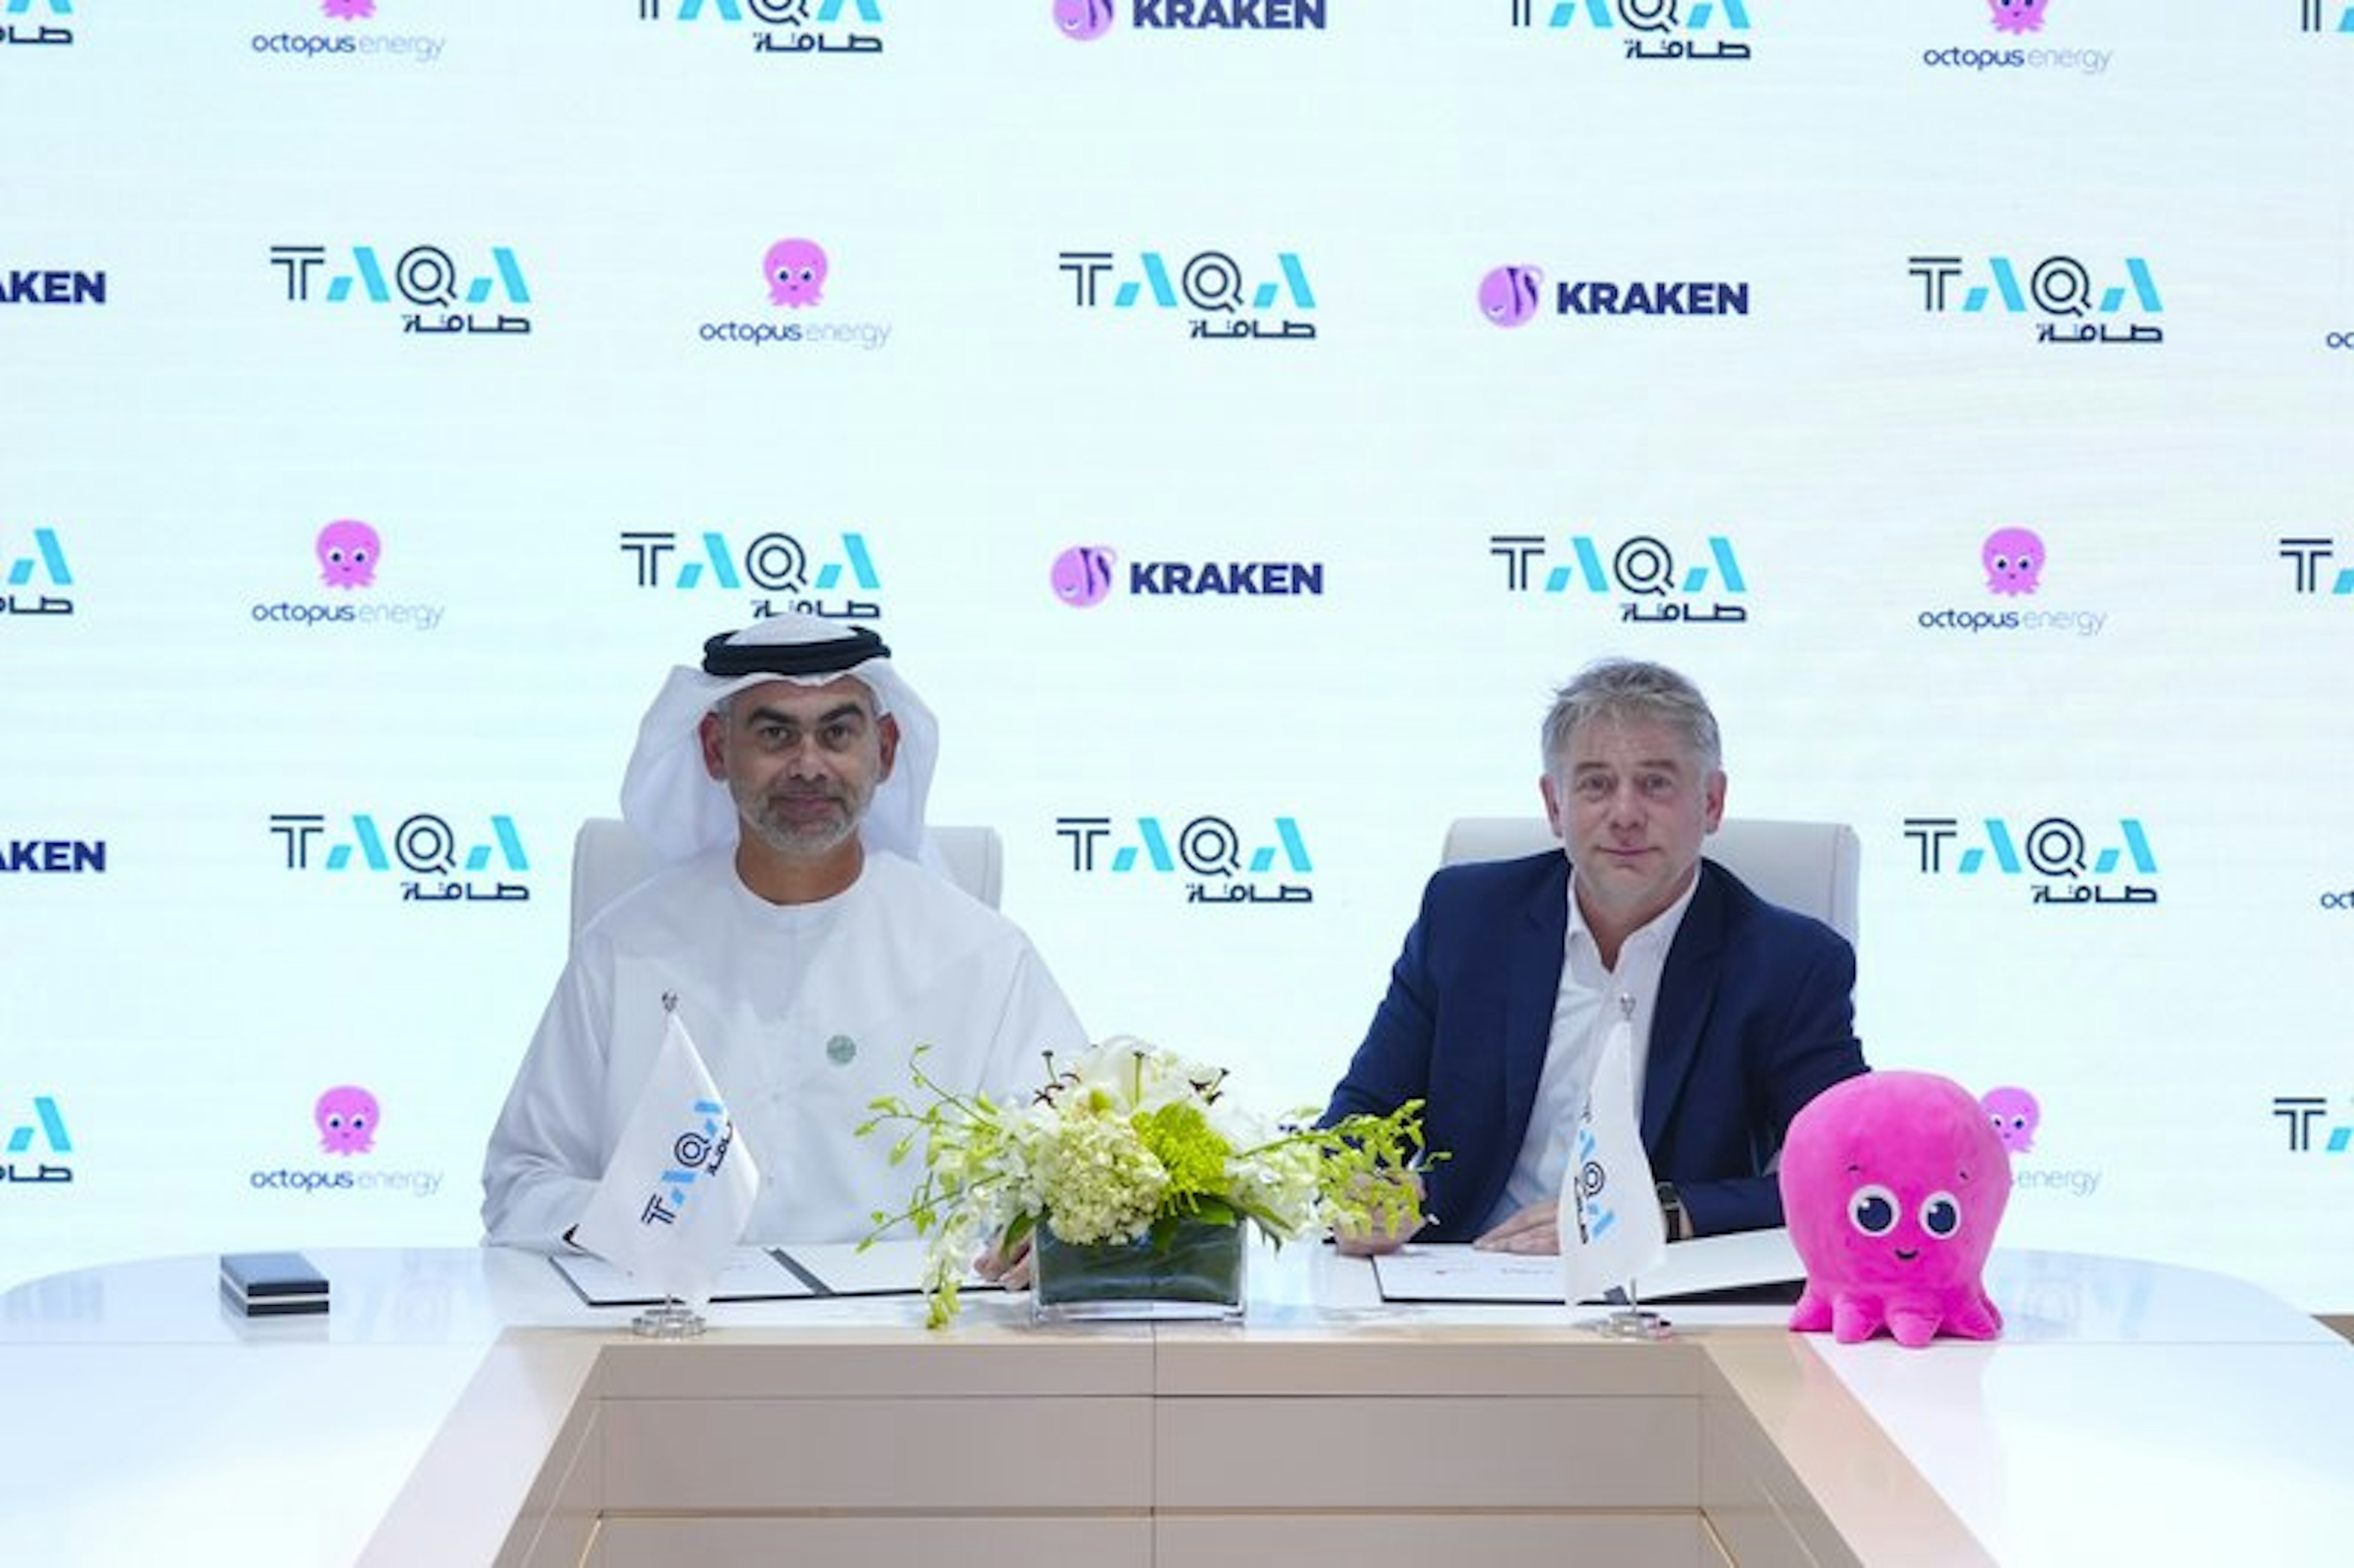 A picture of TAQA CEO Jasim Husain Thabet and Greg Jackson, founder of Octopus.